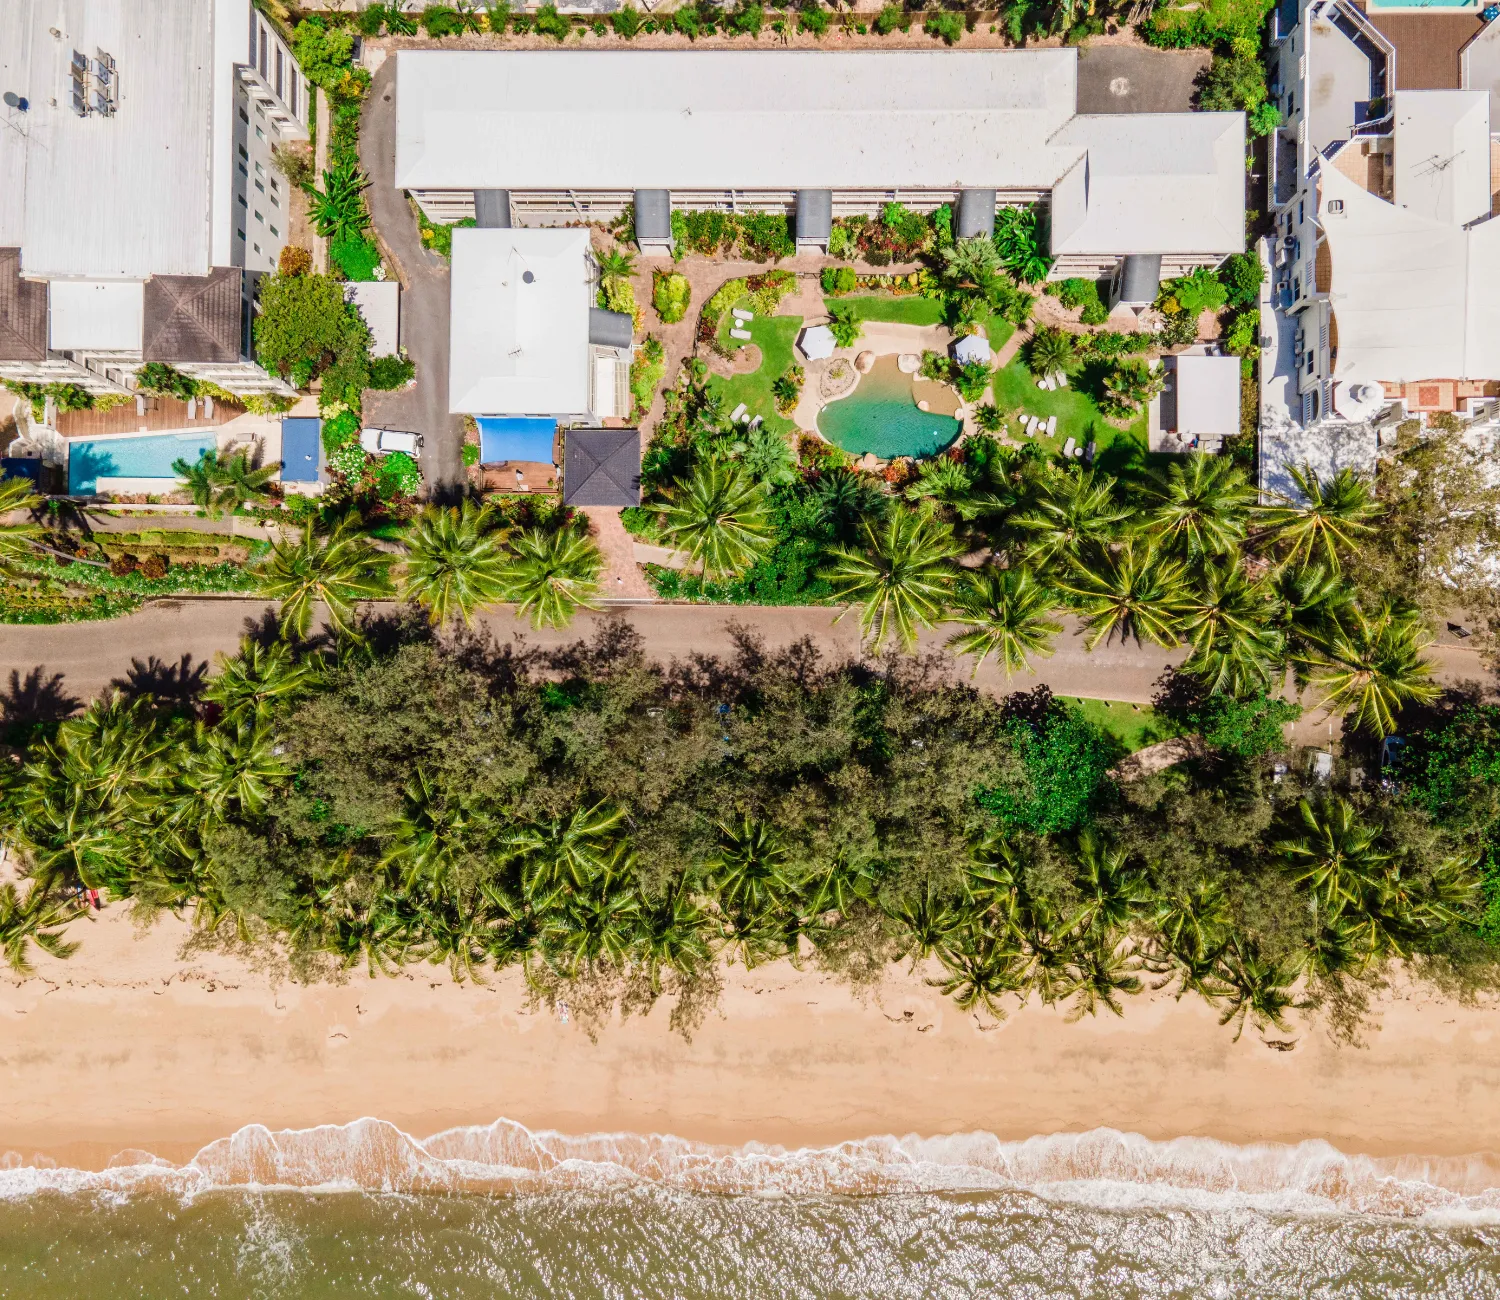 birds eye view of Melaleuca Resort Showing the pool and outdoor area with lush gardens with a line of palms trees separating it from the beach.